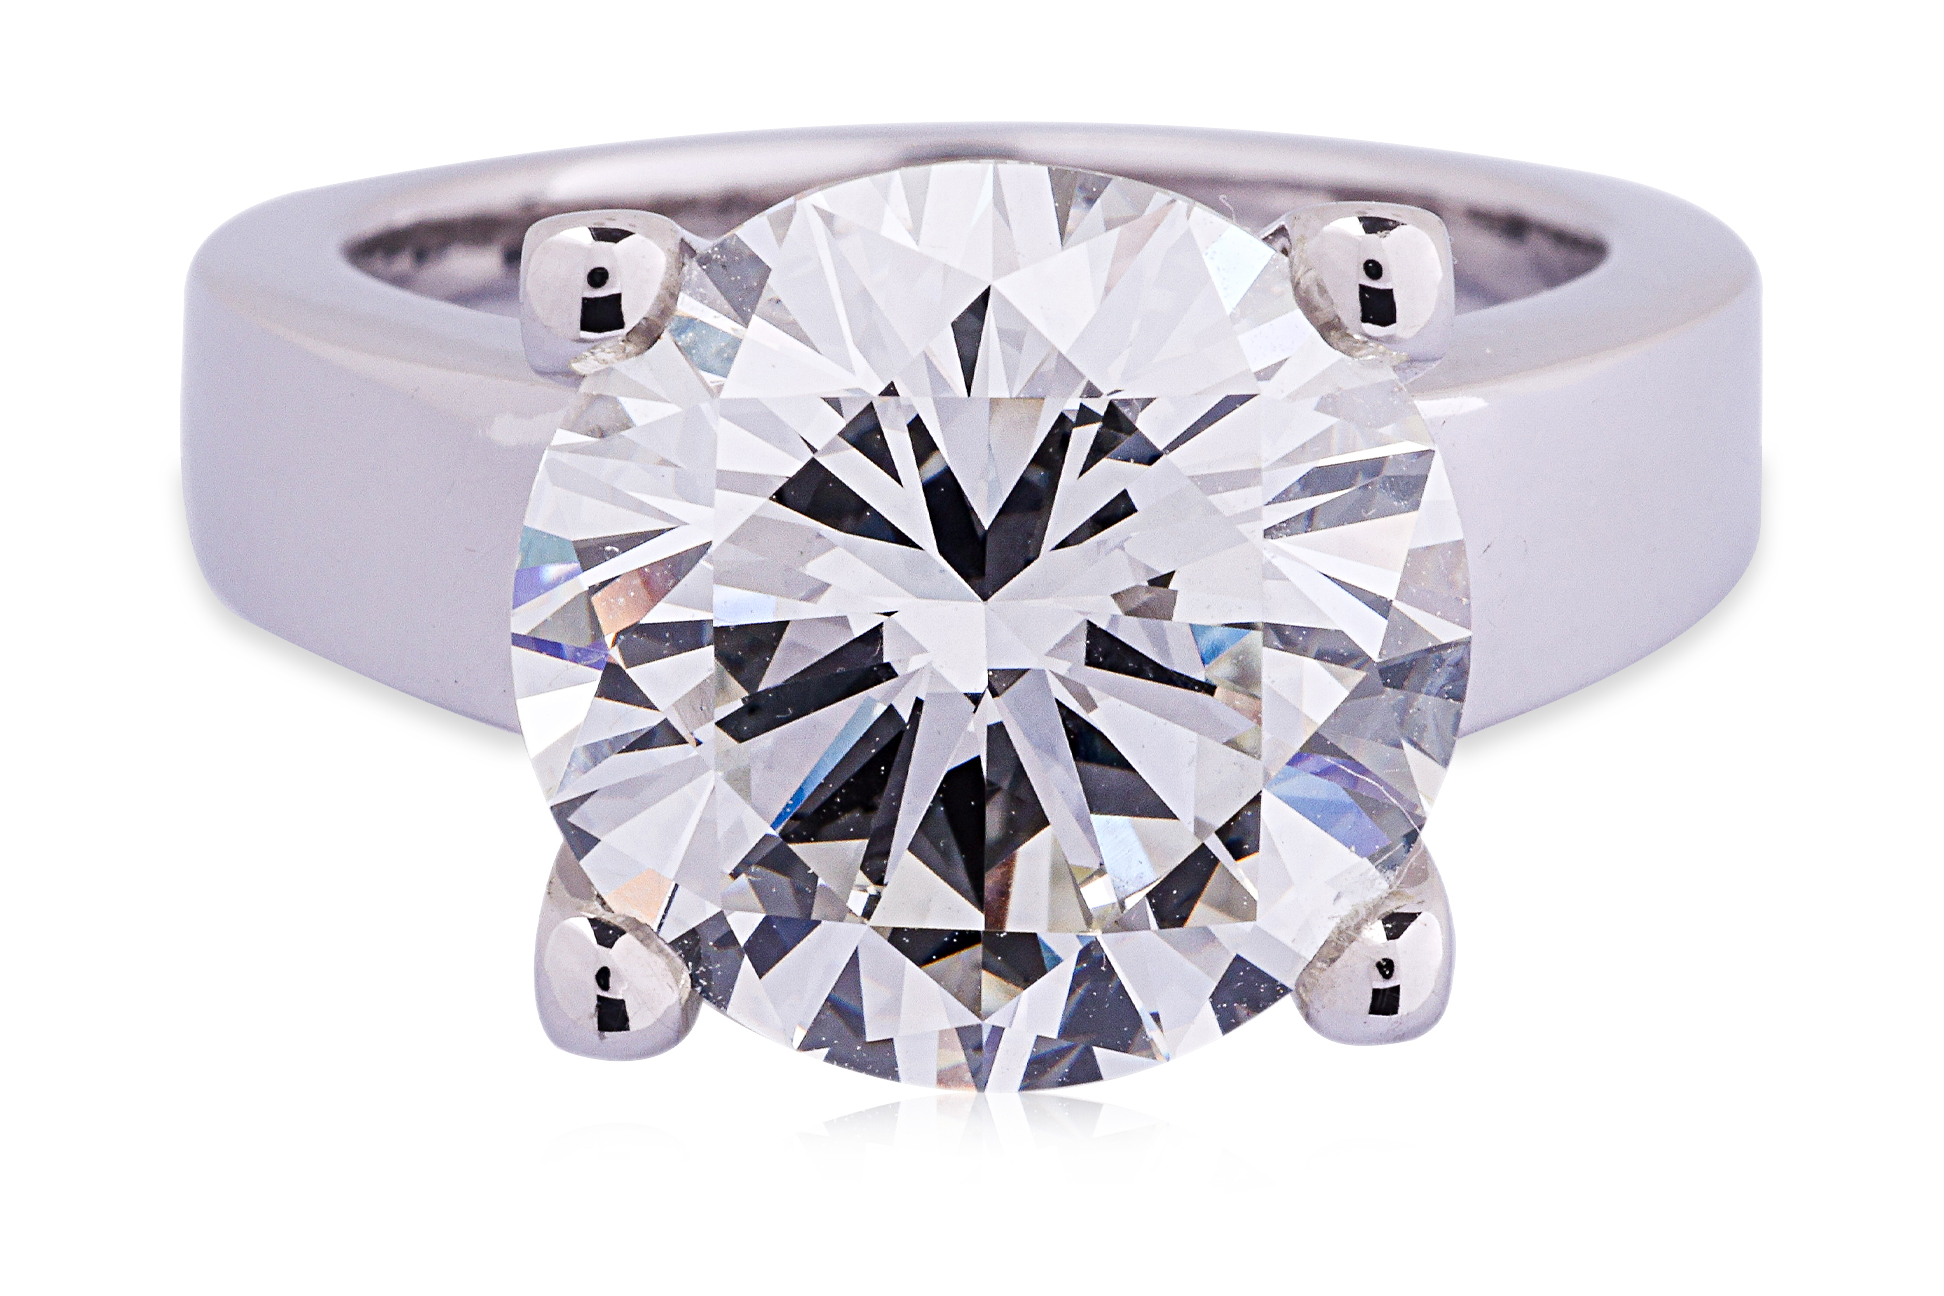 A FINE 7.25 CTS SOLITAIRE DIAMOND RING - Image 5 of 9